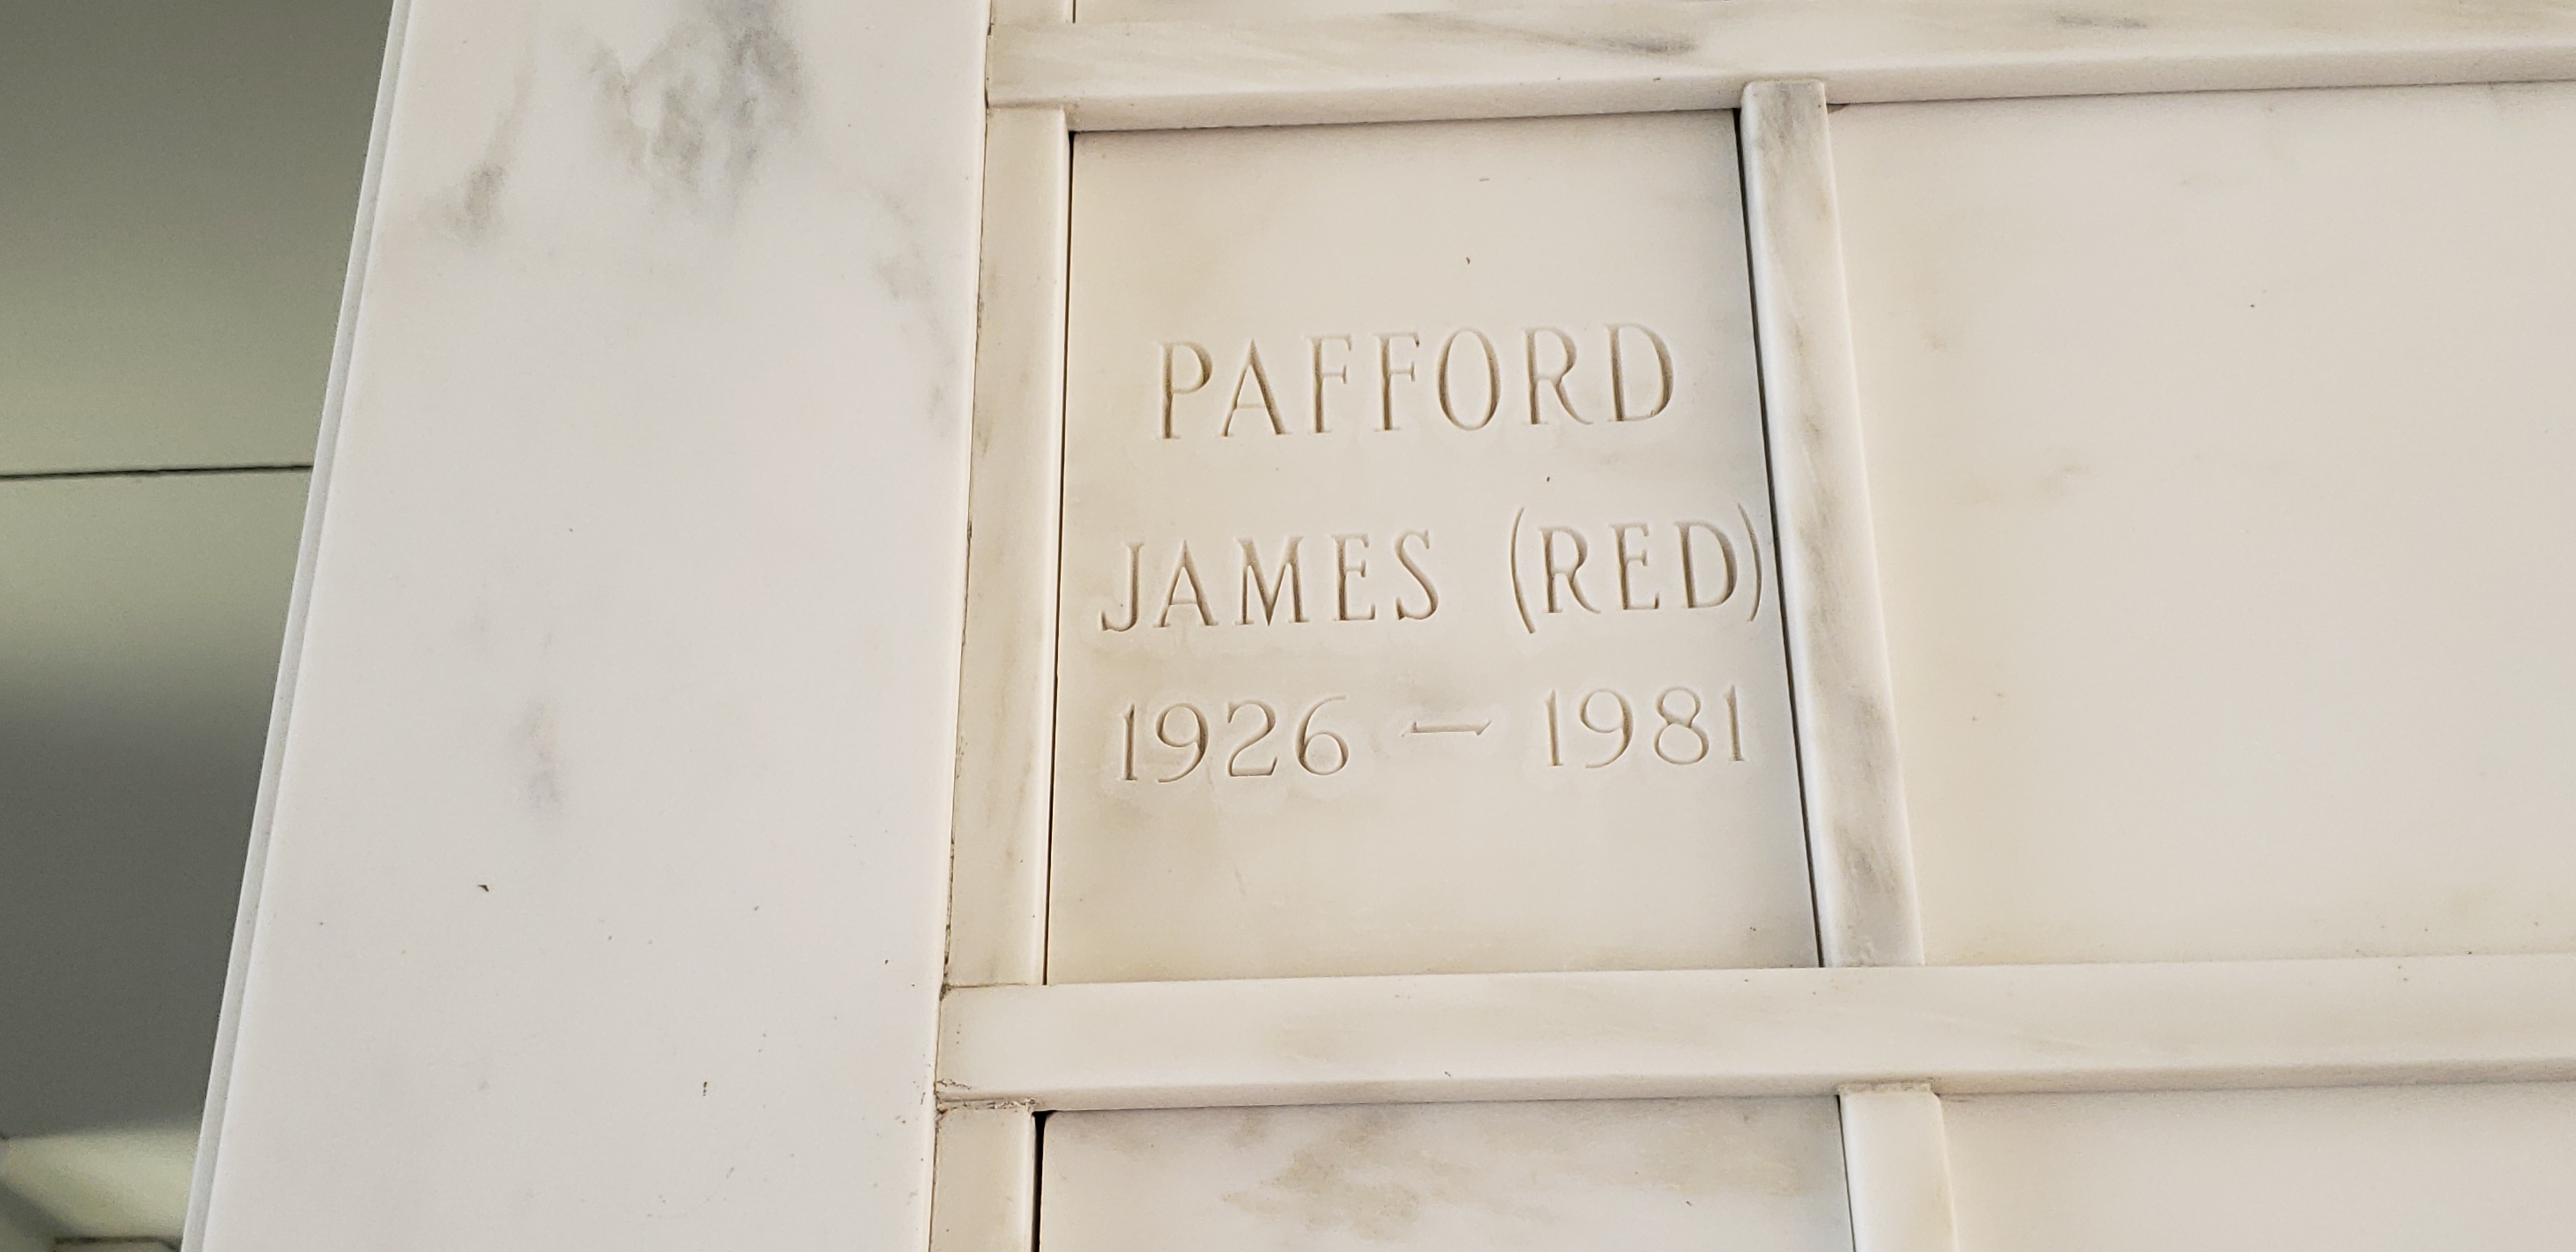 James "Red" Pafford